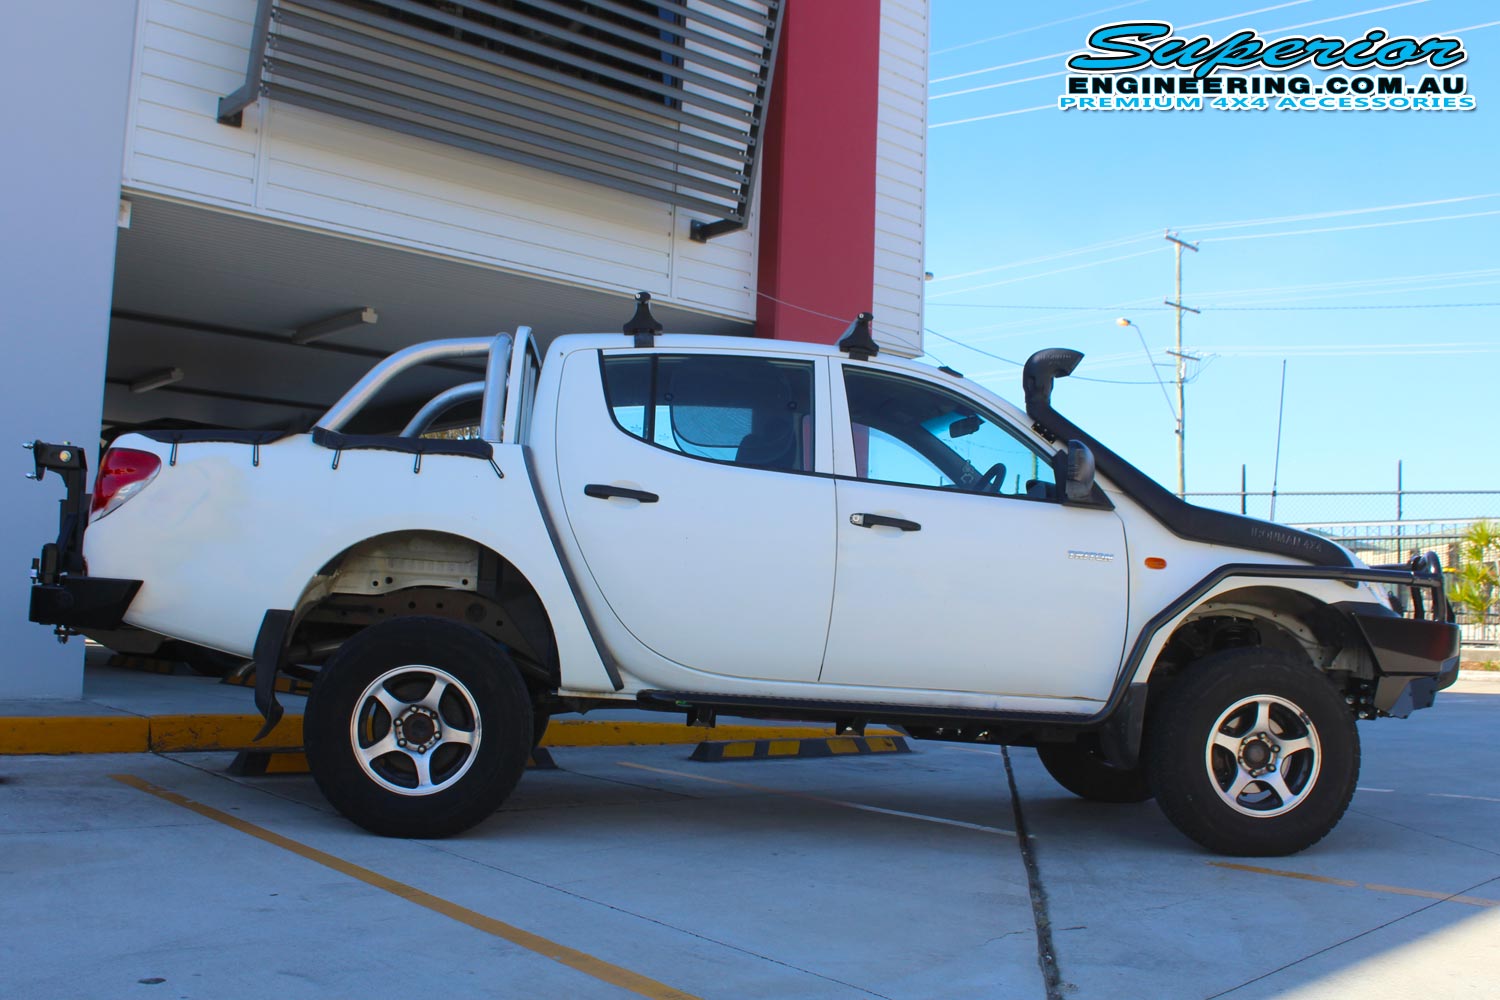 Right side view of a white Mitsubishi Triton four wheel drive after being fitted with a 20mm Bilstein lift kit and a full range of 4x4 accessories from Superior Engineering